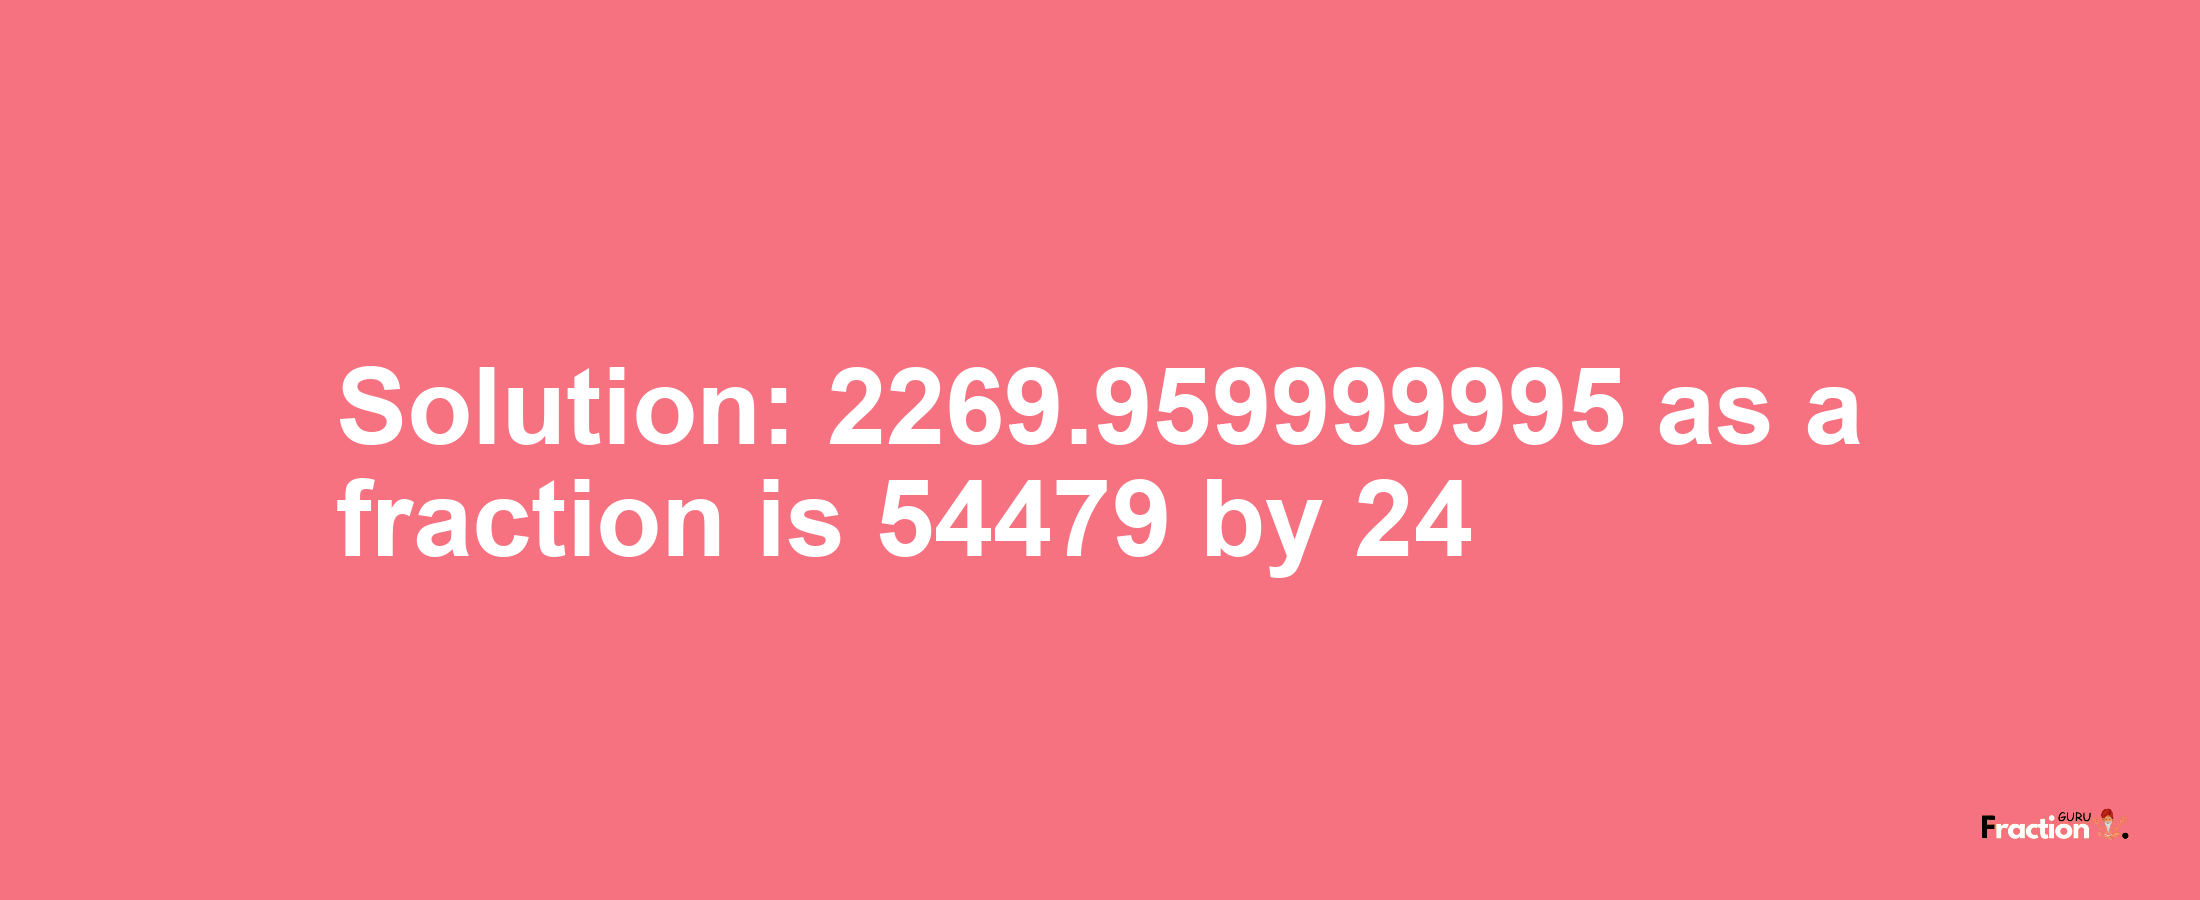 Solution:2269.959999995 as a fraction is 54479/24